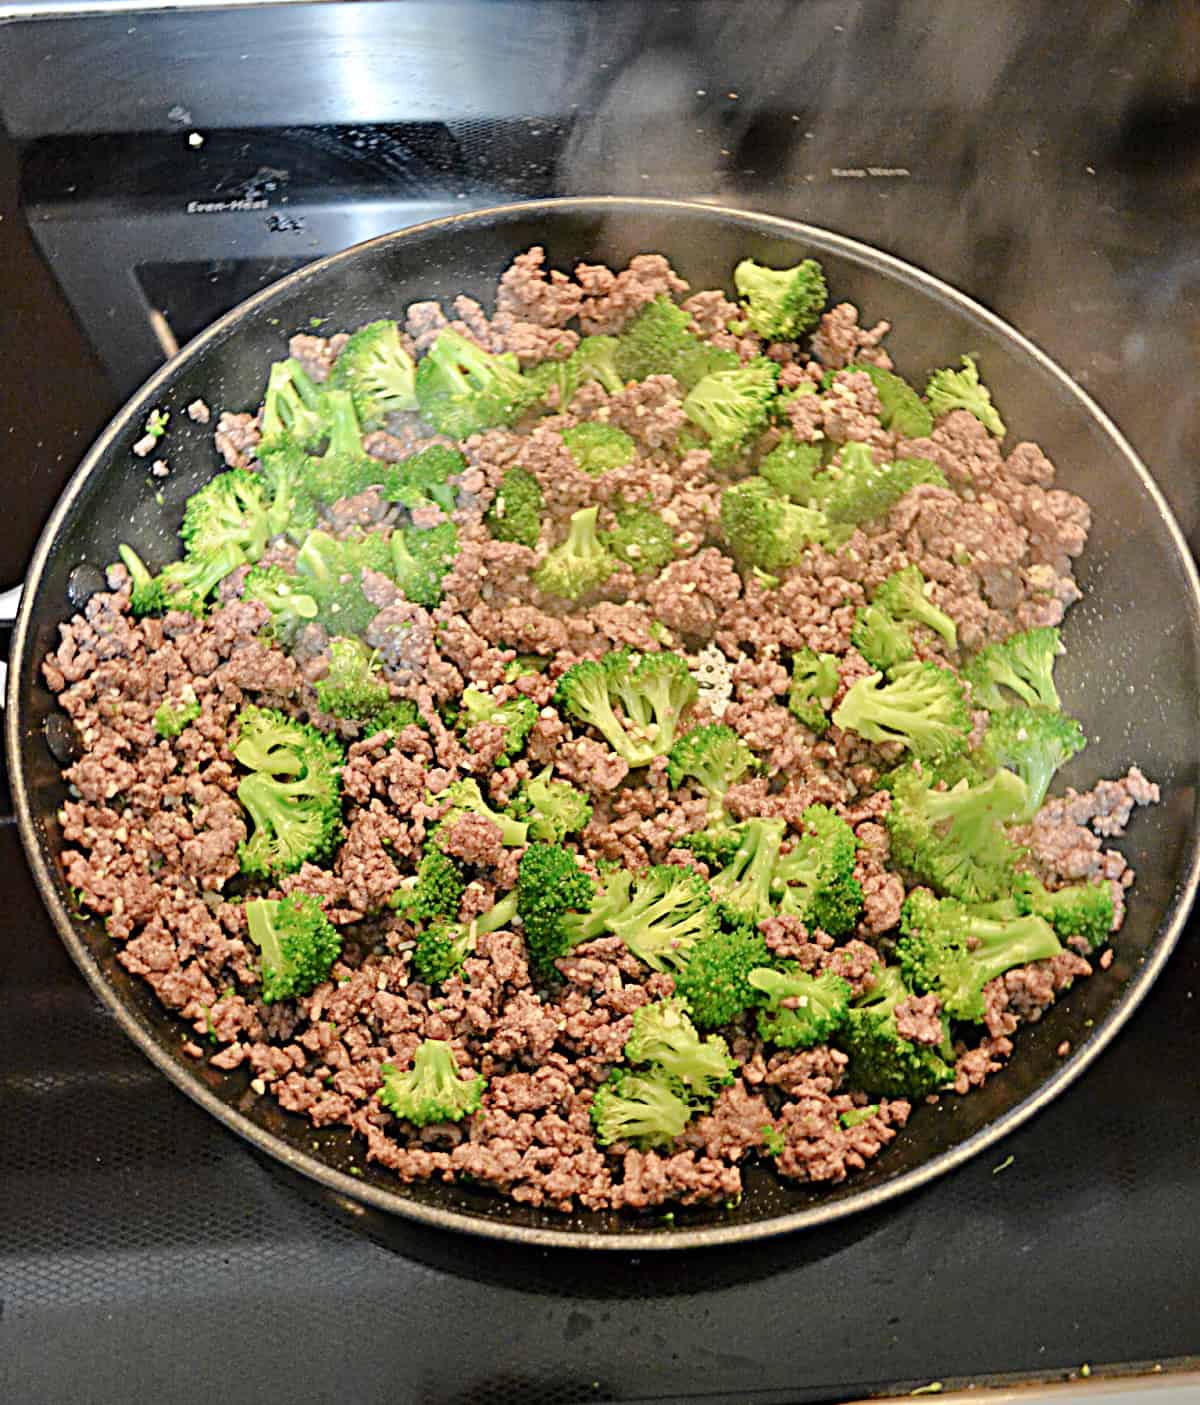 A pan of ground beef and broccoli.